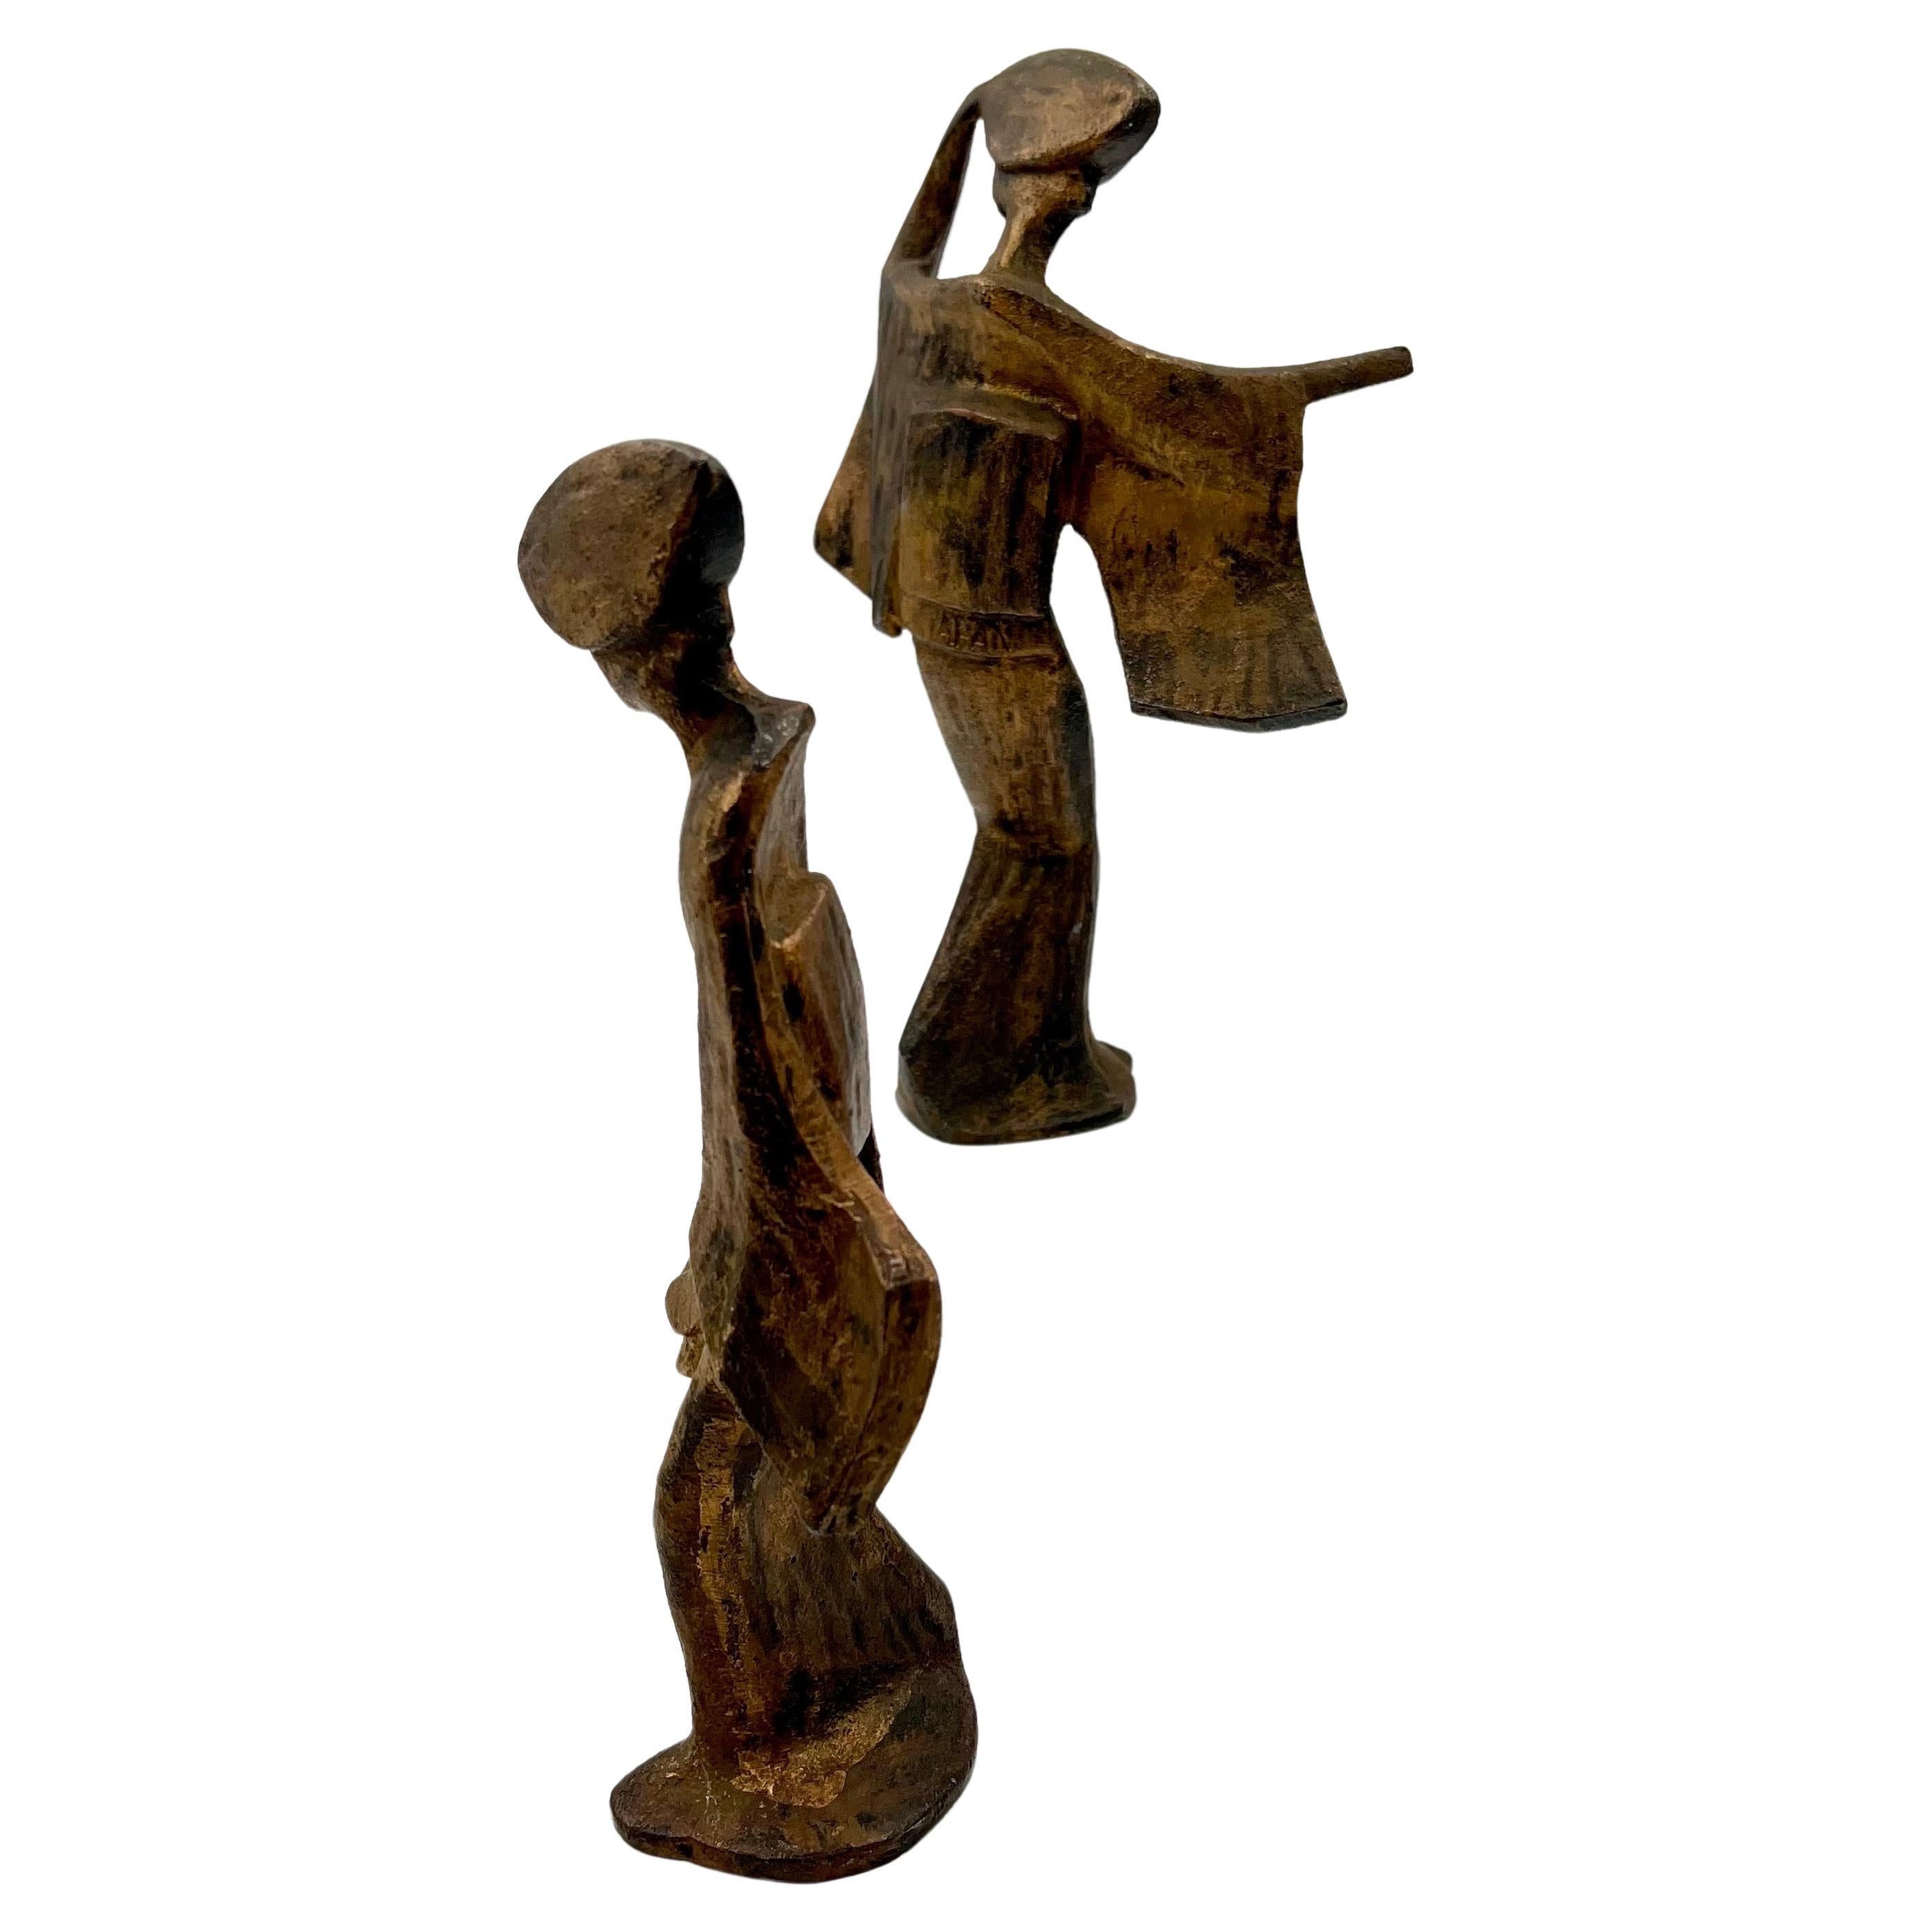 A very cool pair of Japanese geisha figurines, circa 1960s. The pieces are cast iron with a gold finish and are quite heavy and taller than the regular ones they would make a great Mid-Century Modern accent in any space.